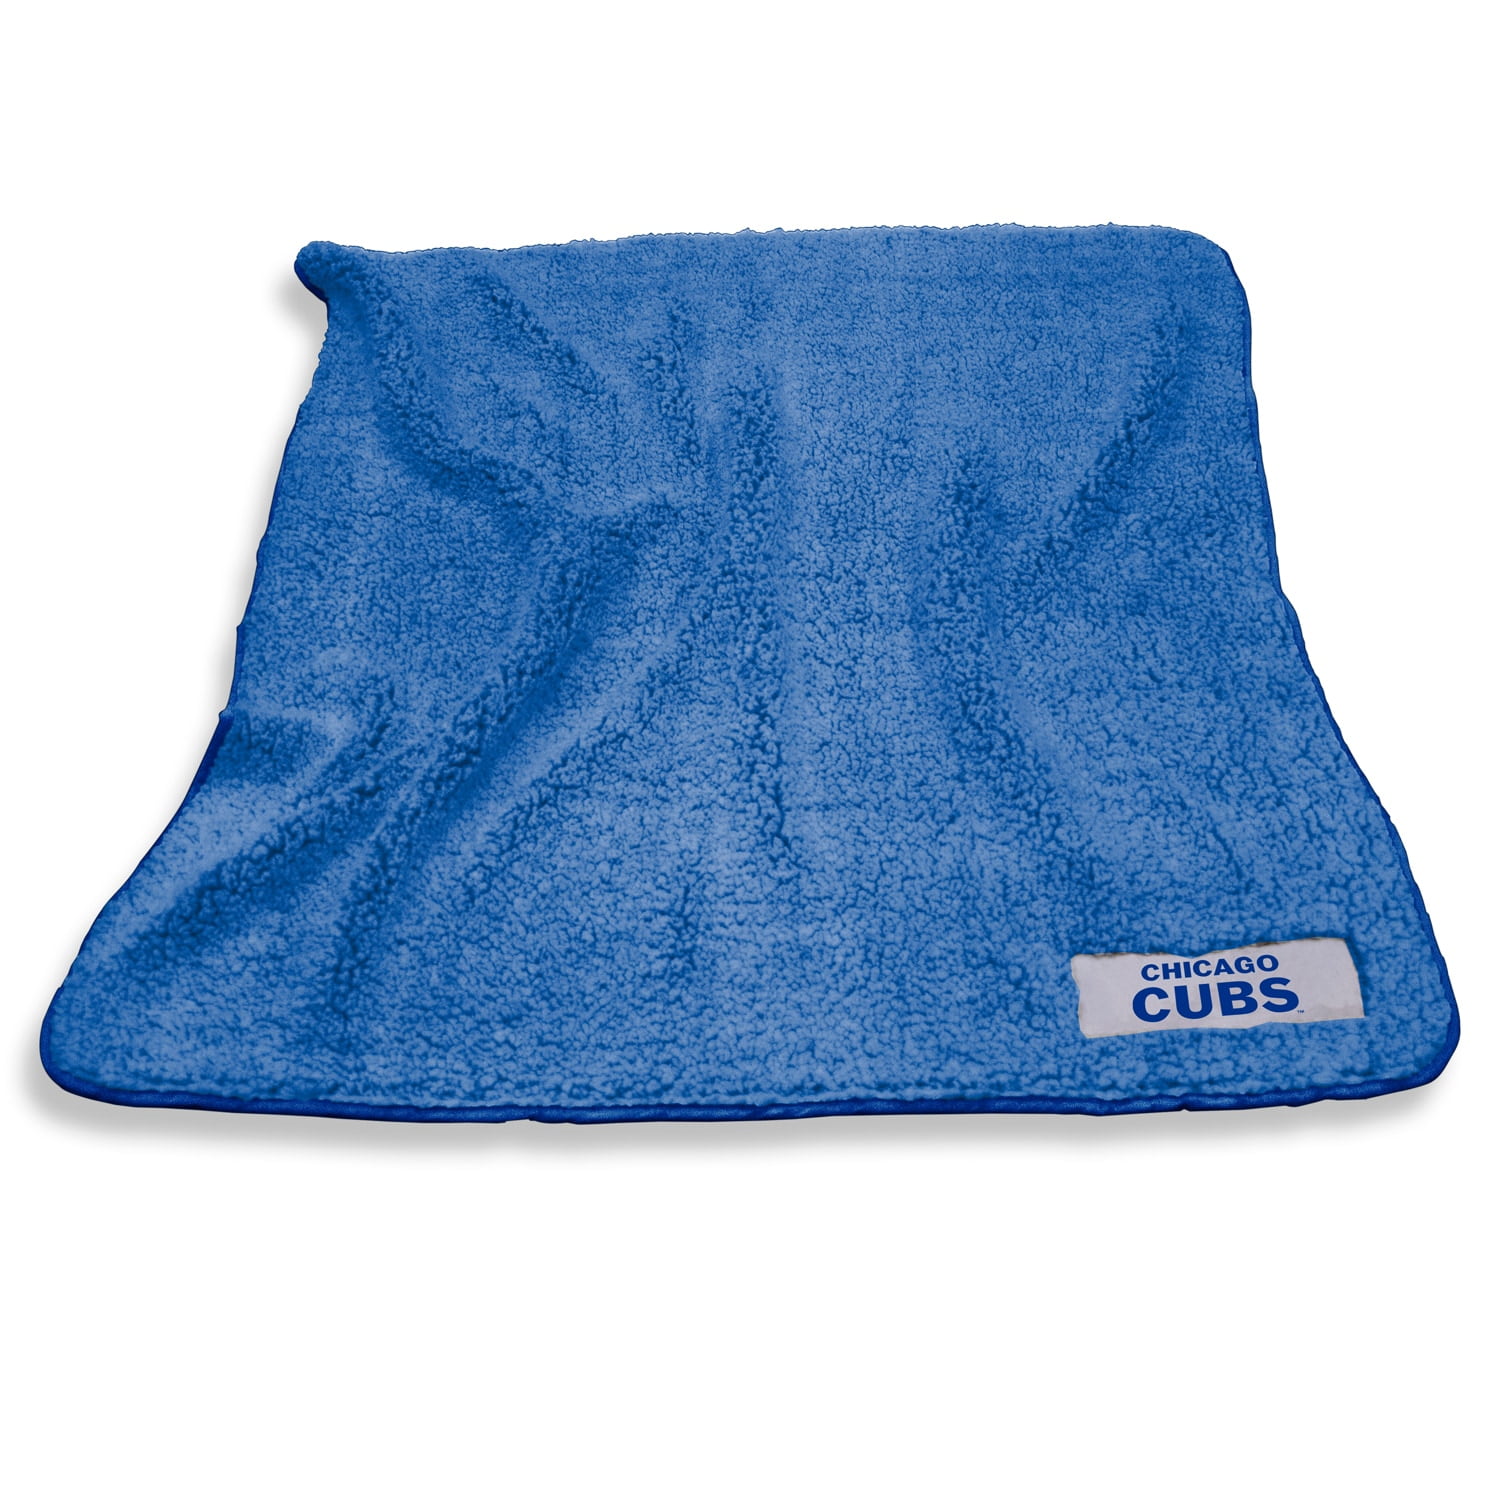 Chicago Cubs Ultra Soft 50 x 60 Blanket